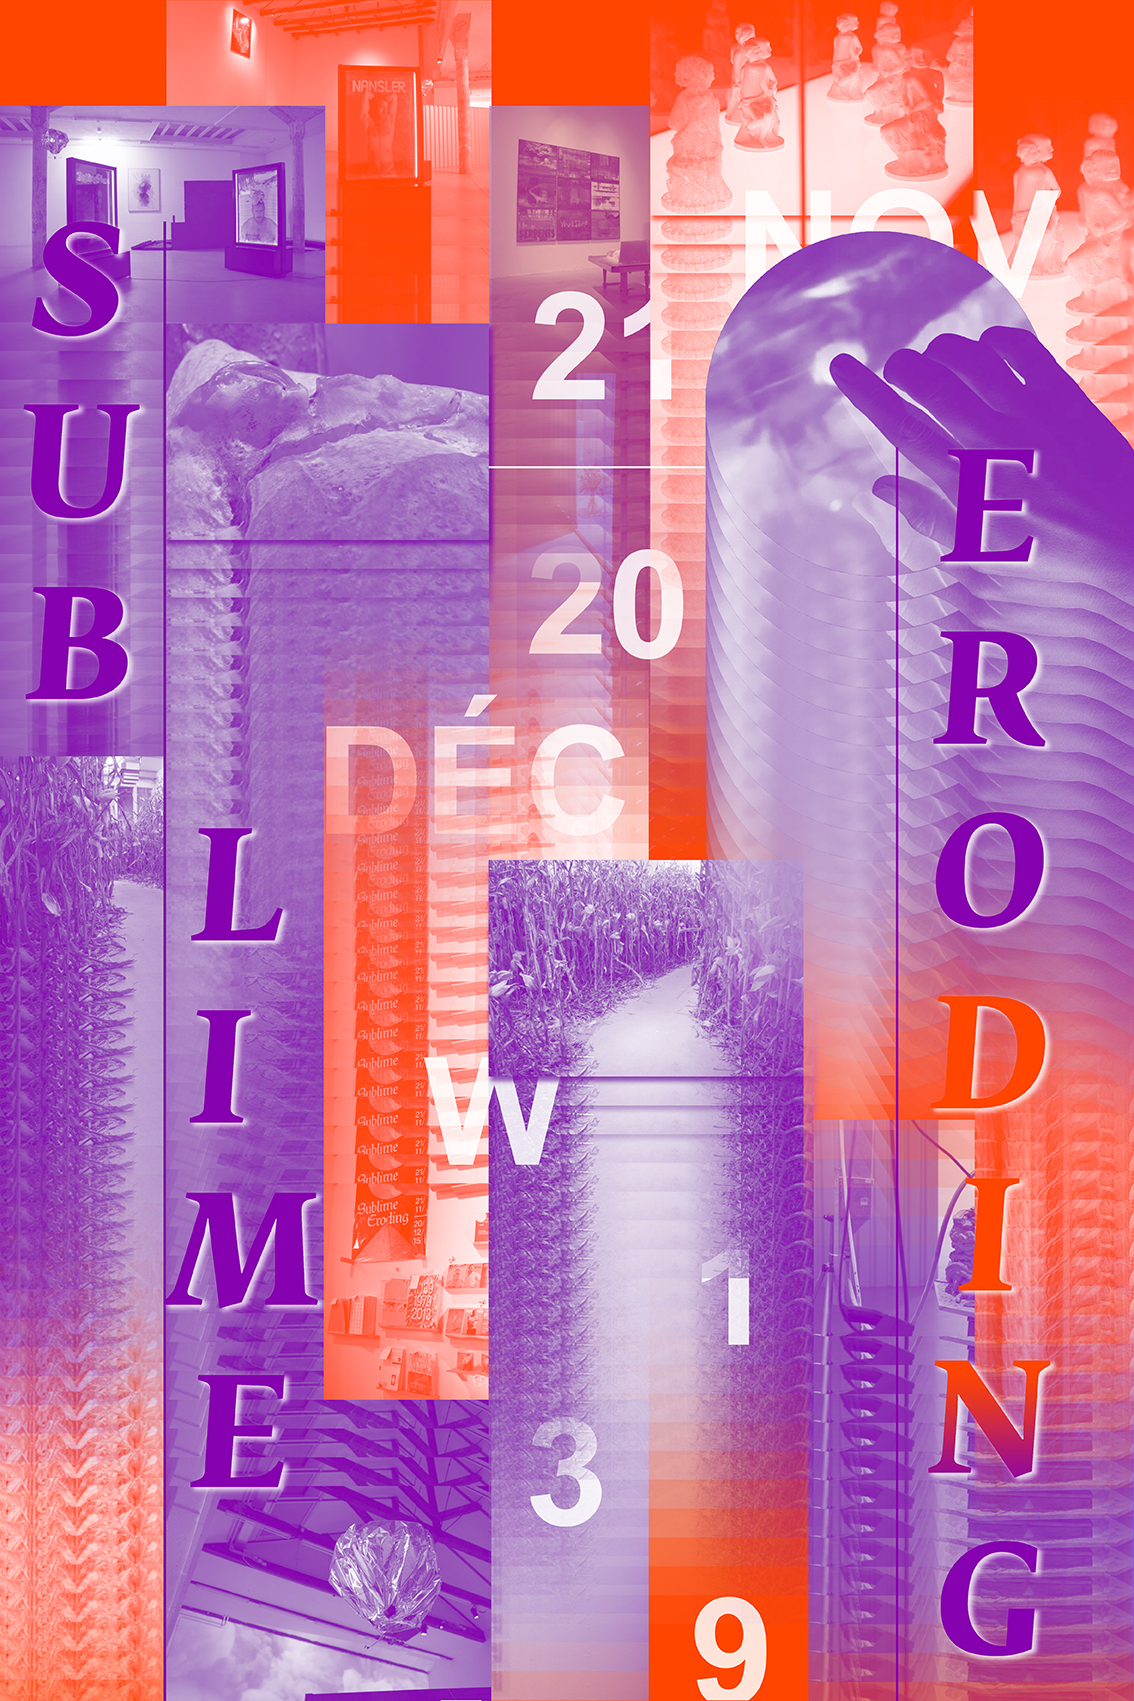 Poster-dyptic for the exhibition Sublime Eroding